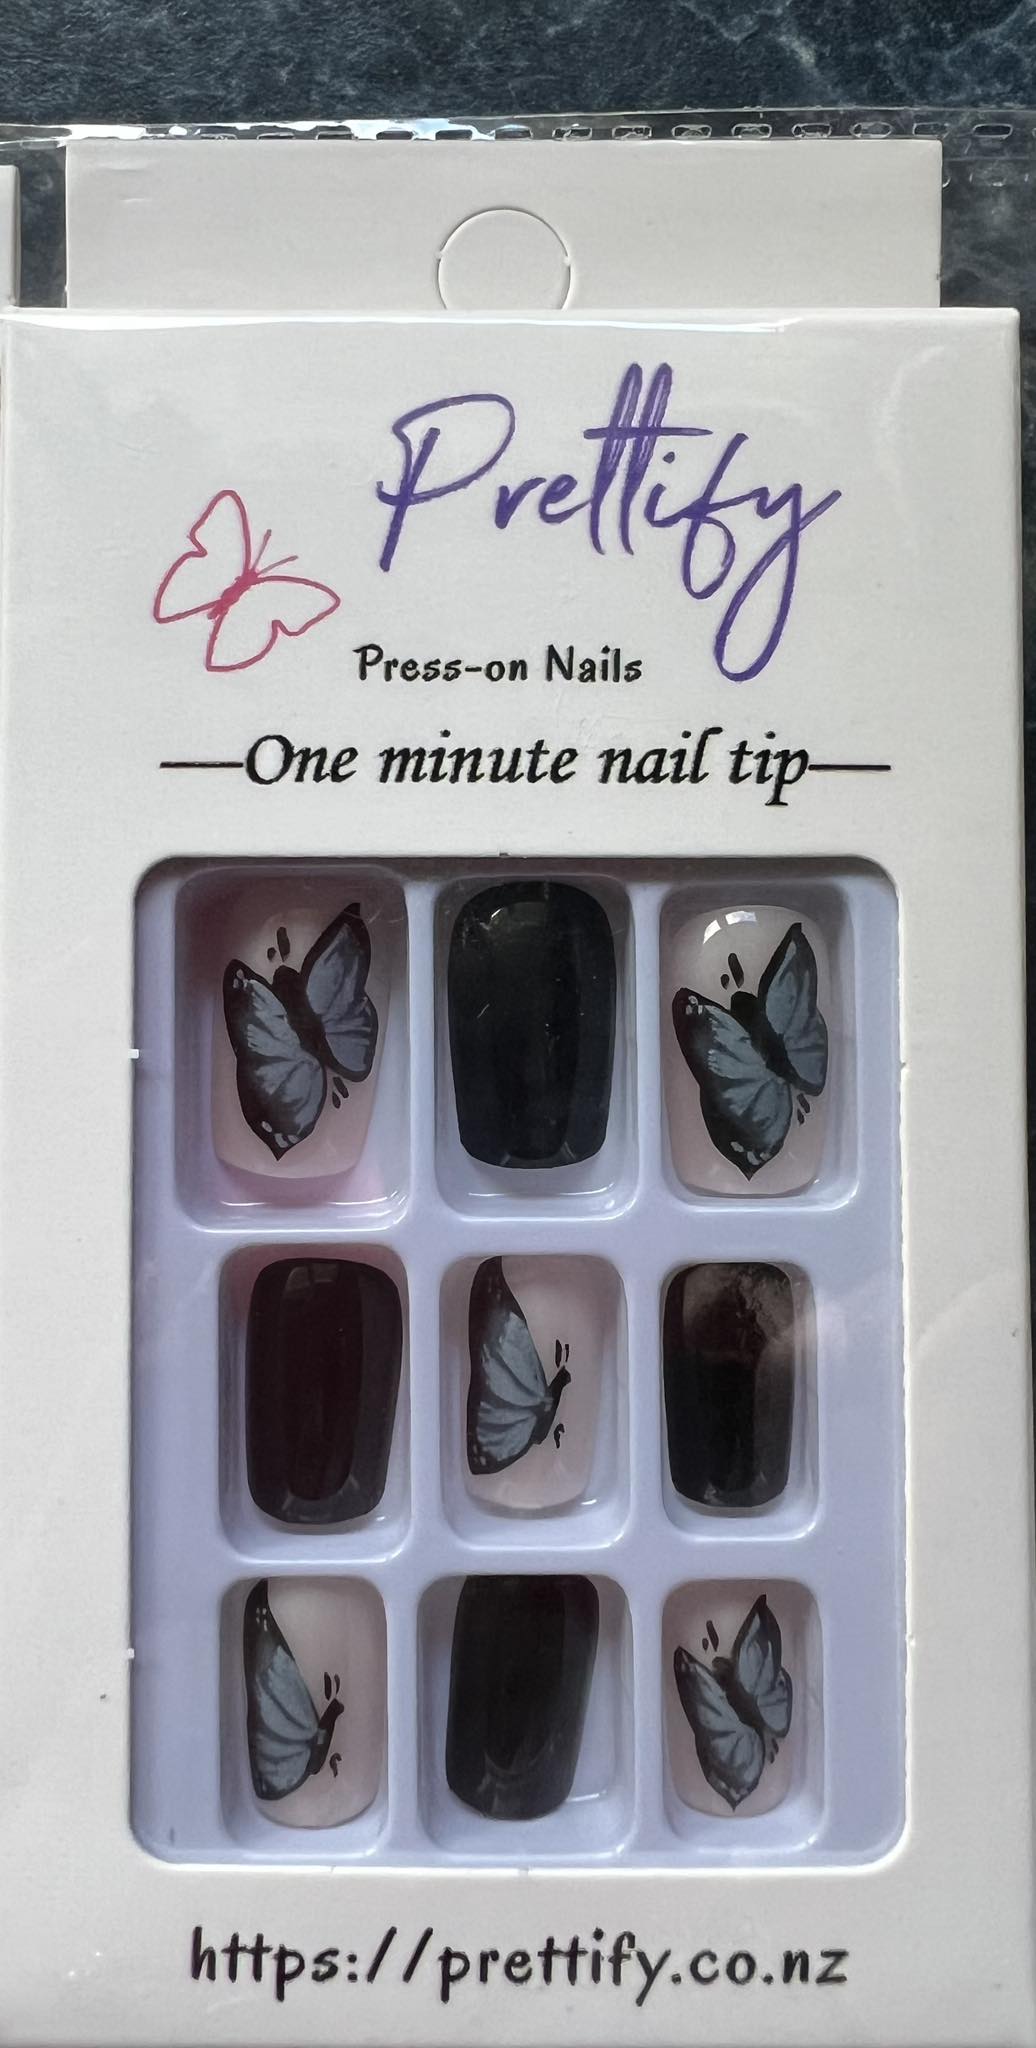 Medium Length Squoval Press on Nails. Black with Butterflies. Durable Acrylic Press on Nails. Easy and quick to apply. Great for those special occasions, parties or add an edge to any outfit. Gorgeous, flattering and you can re-use them again and again.